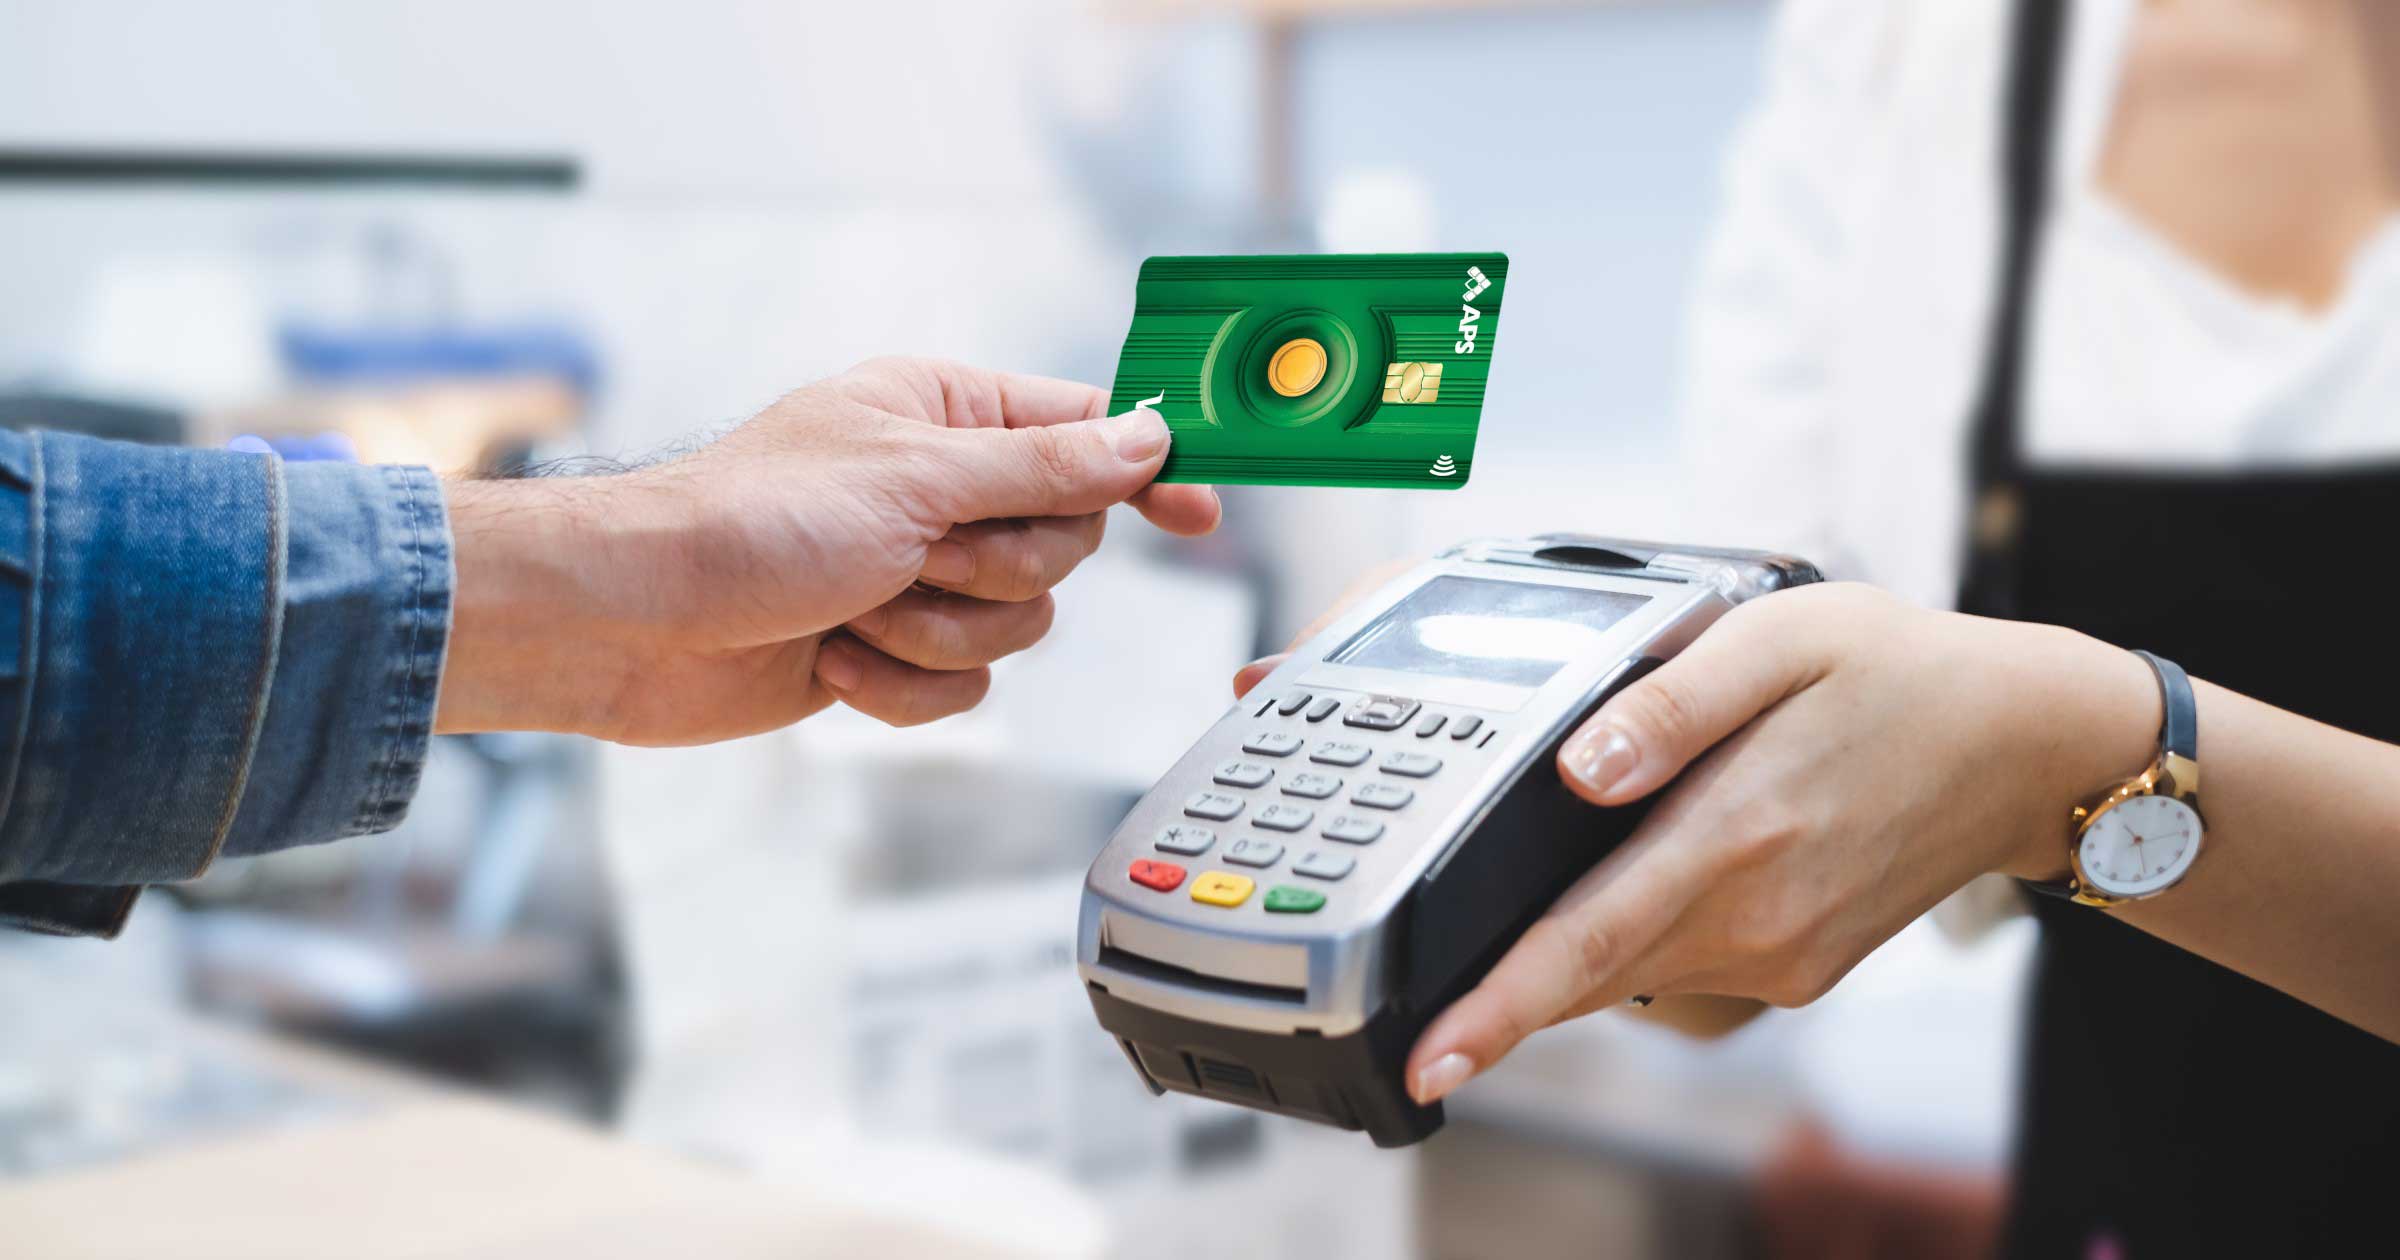 Debit Card vs Credit Card? The Right Choice for your Financial Goals